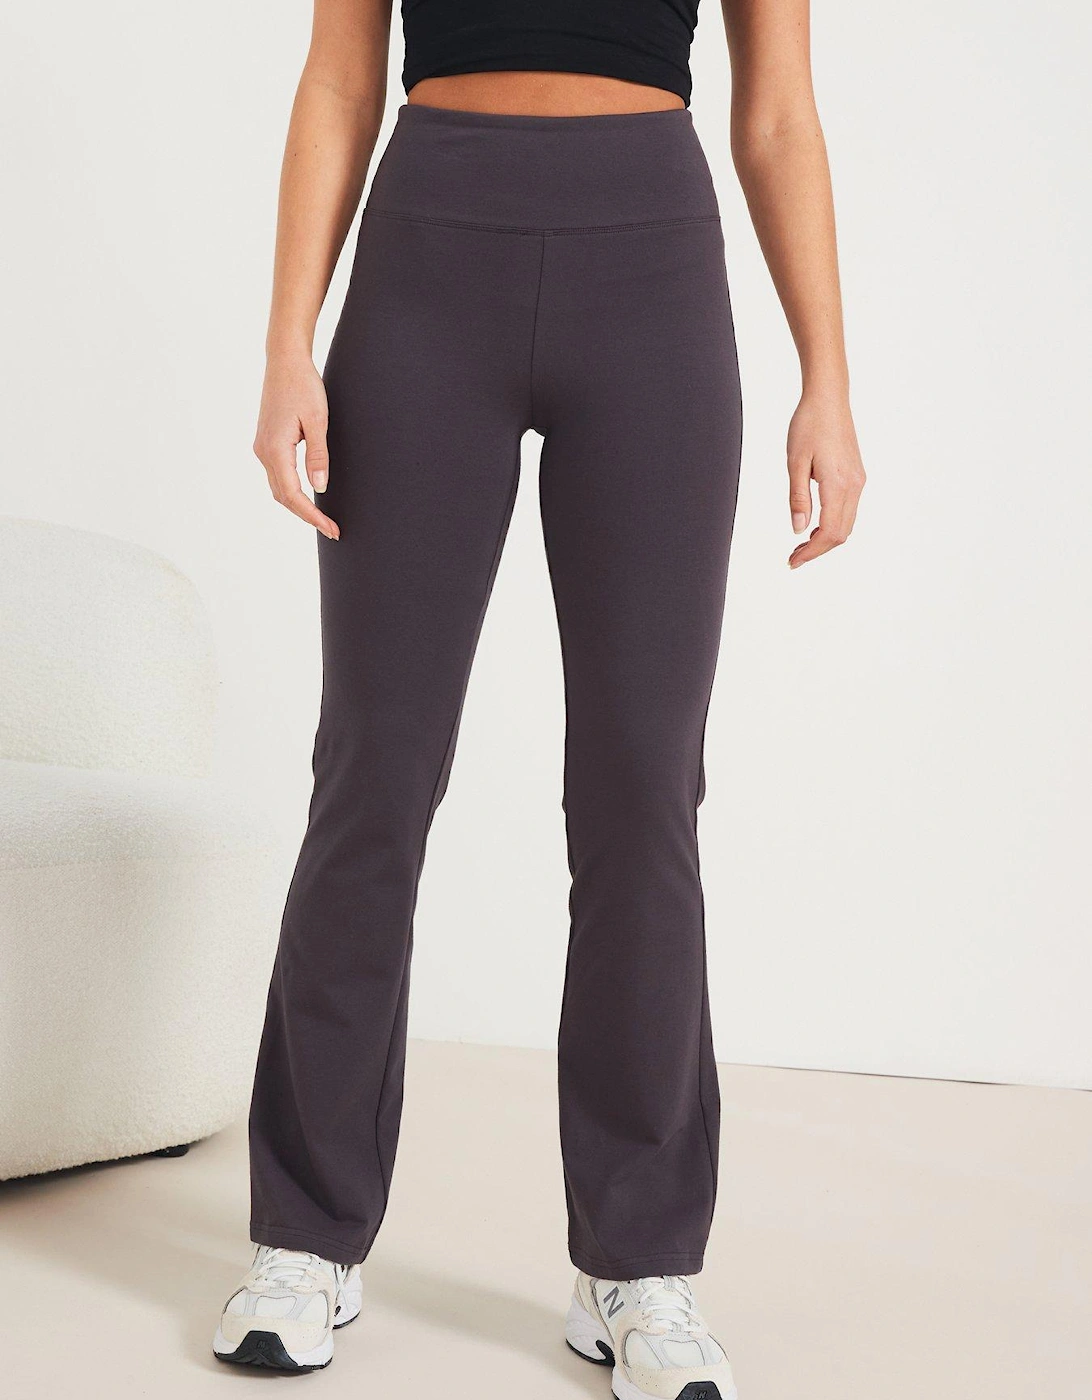 Confident Curve Kickflare Yoga Pant - Charcoal, 7 of 6